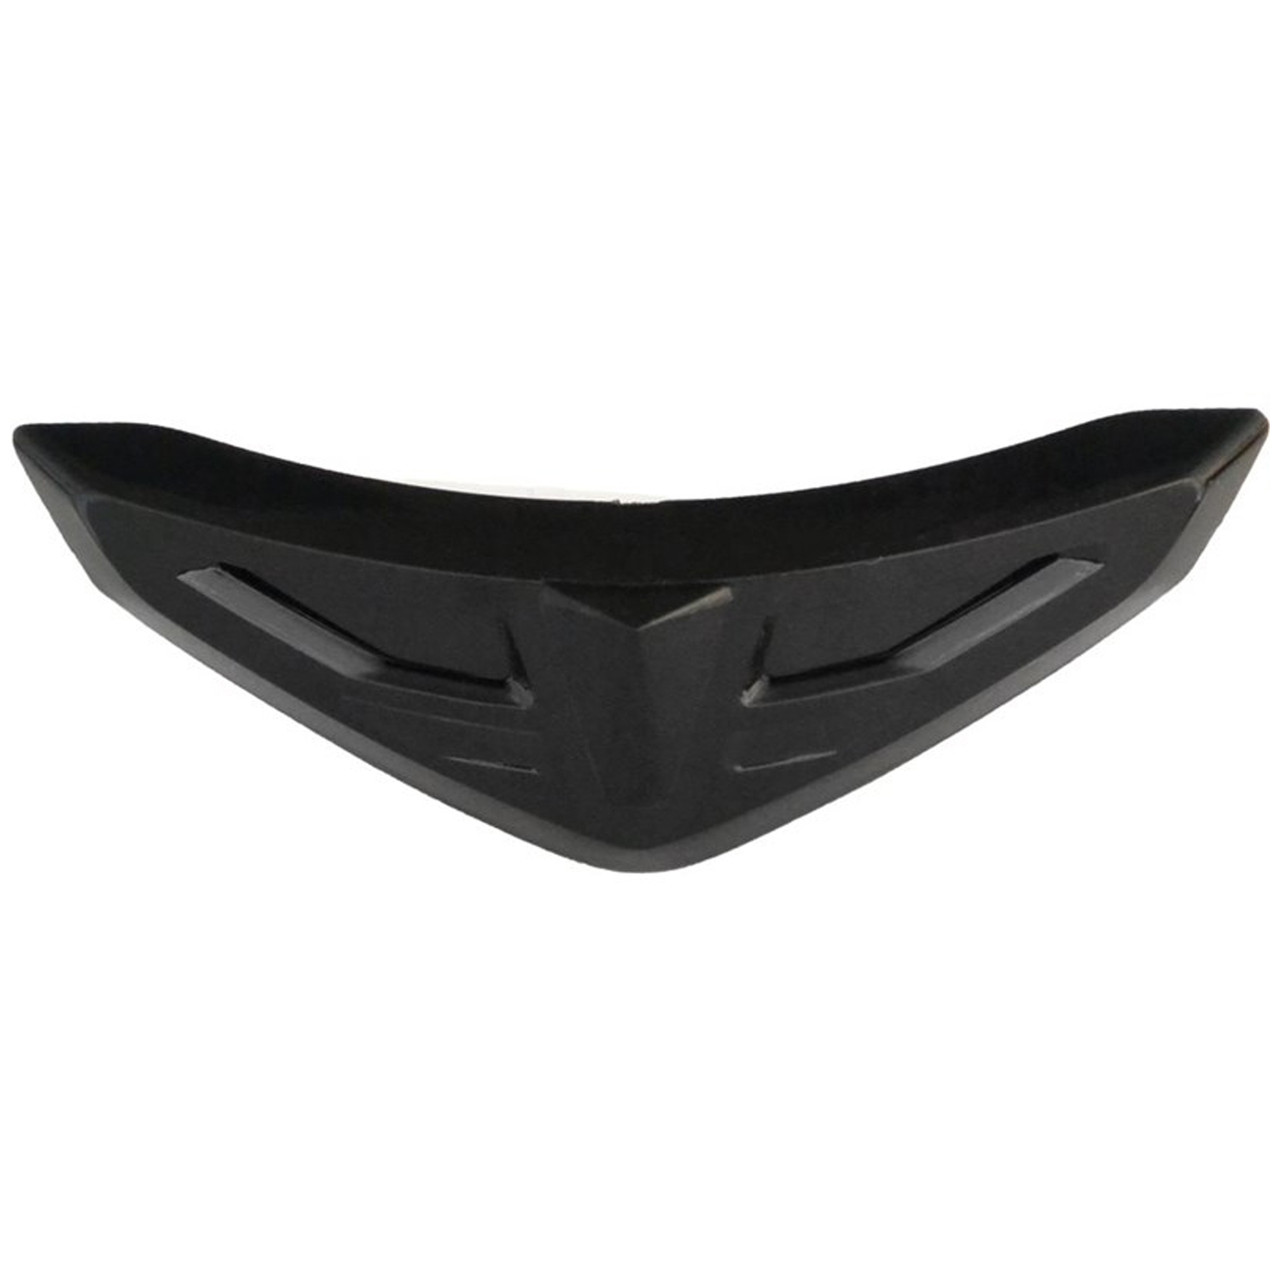 Polaris Snowmobile New OEM, Replacement Chin Vent, AF2.0 Adult Helmet, 2862128